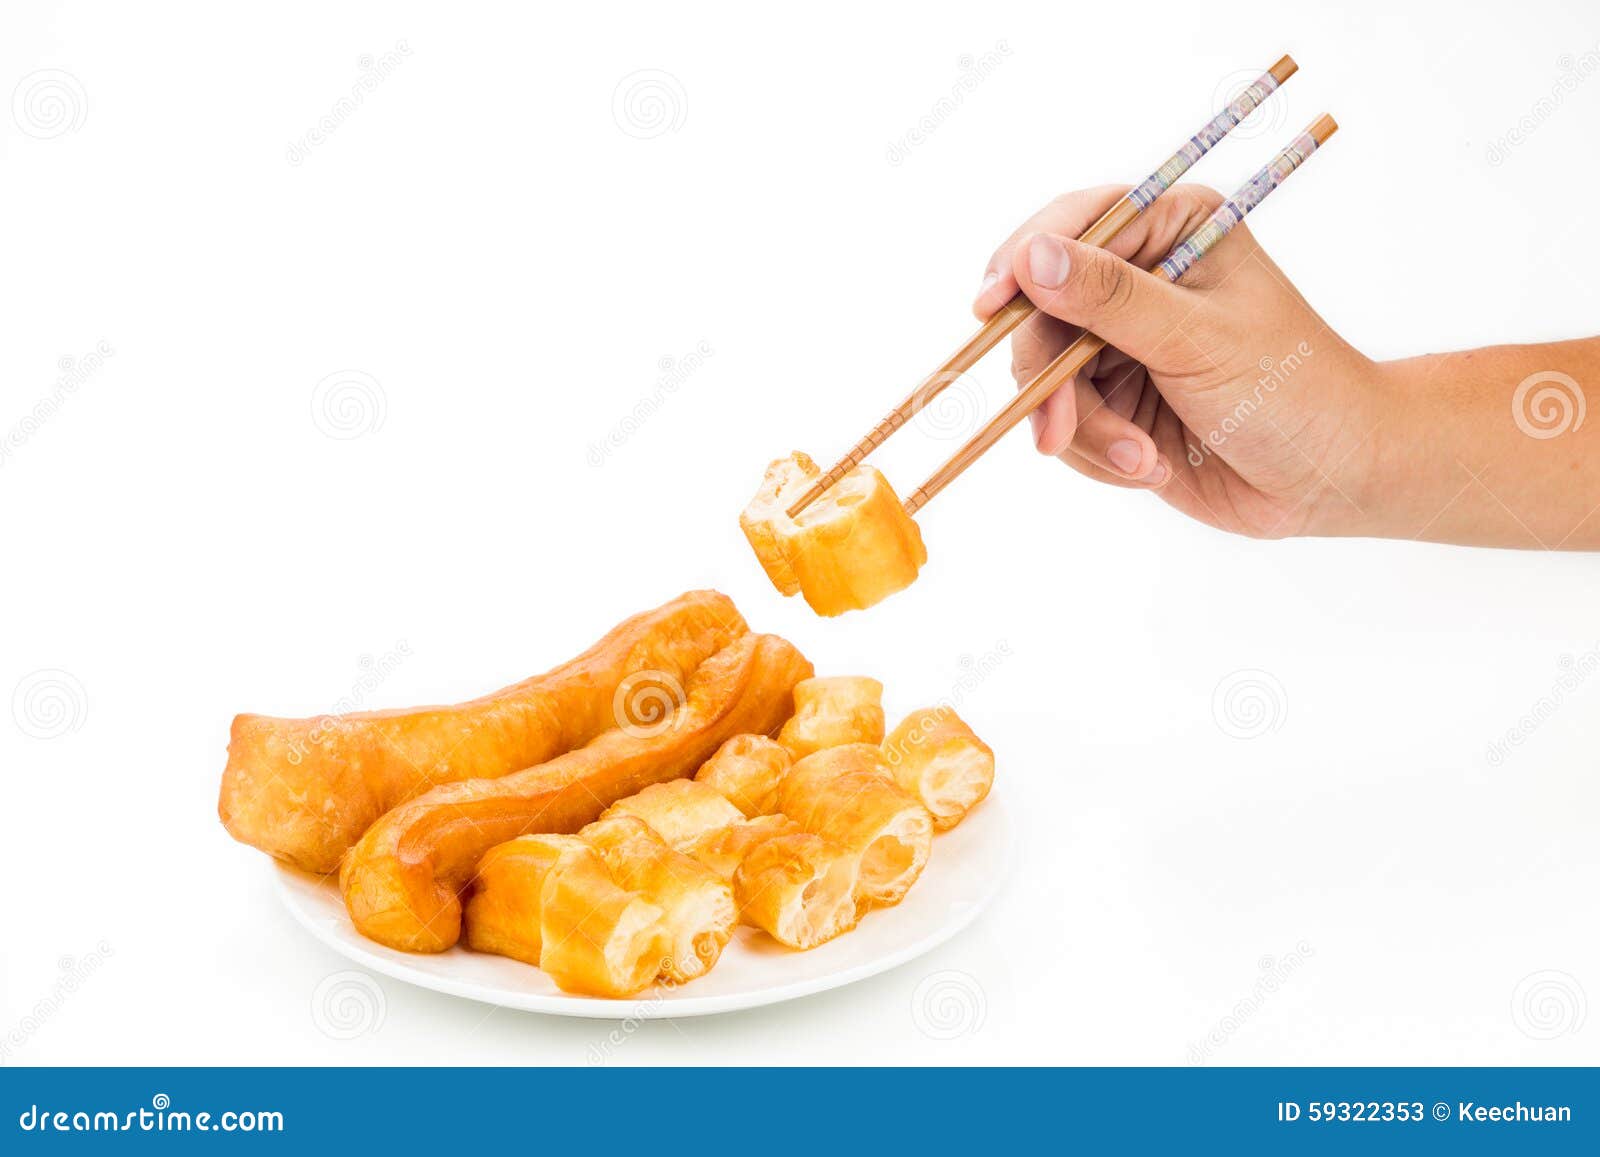 chopsticks reaching for a piece of you tiao, or fried bread stic